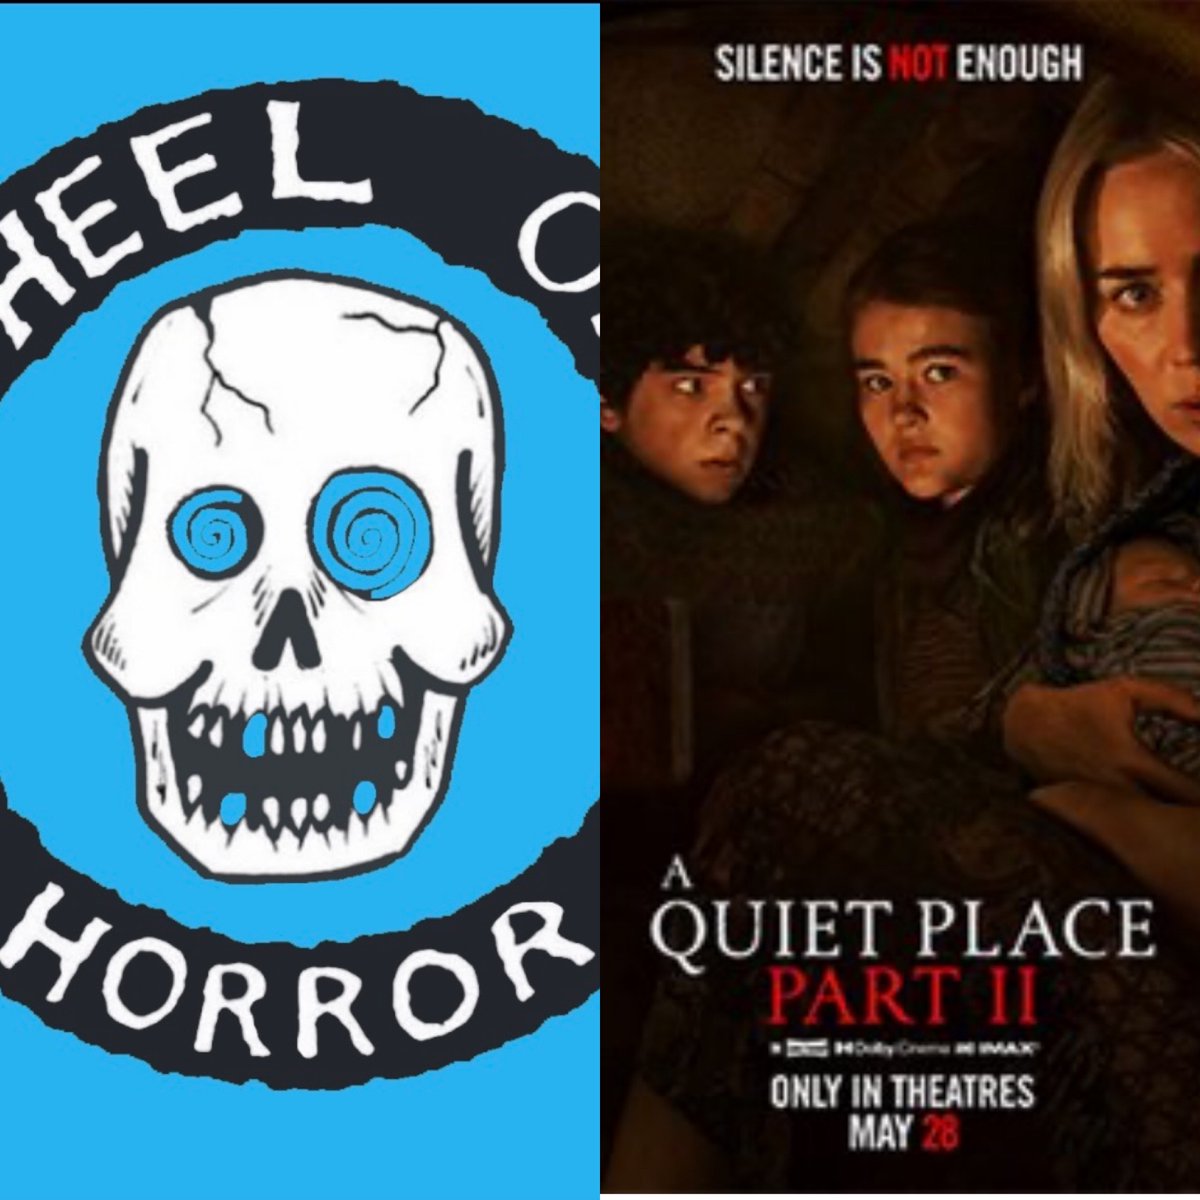 Shhhhh! We are back and today we are talking A Quiet Place Part 2, with our longtime returning guest Dom Berger. It's got so many Alien Monster things, so much walking with a baby, so much quiet. Enjoy! Link to Episode: api.spreaker.com/v2/episodes/58… #HorrorFamily @AQuietPlace #scary